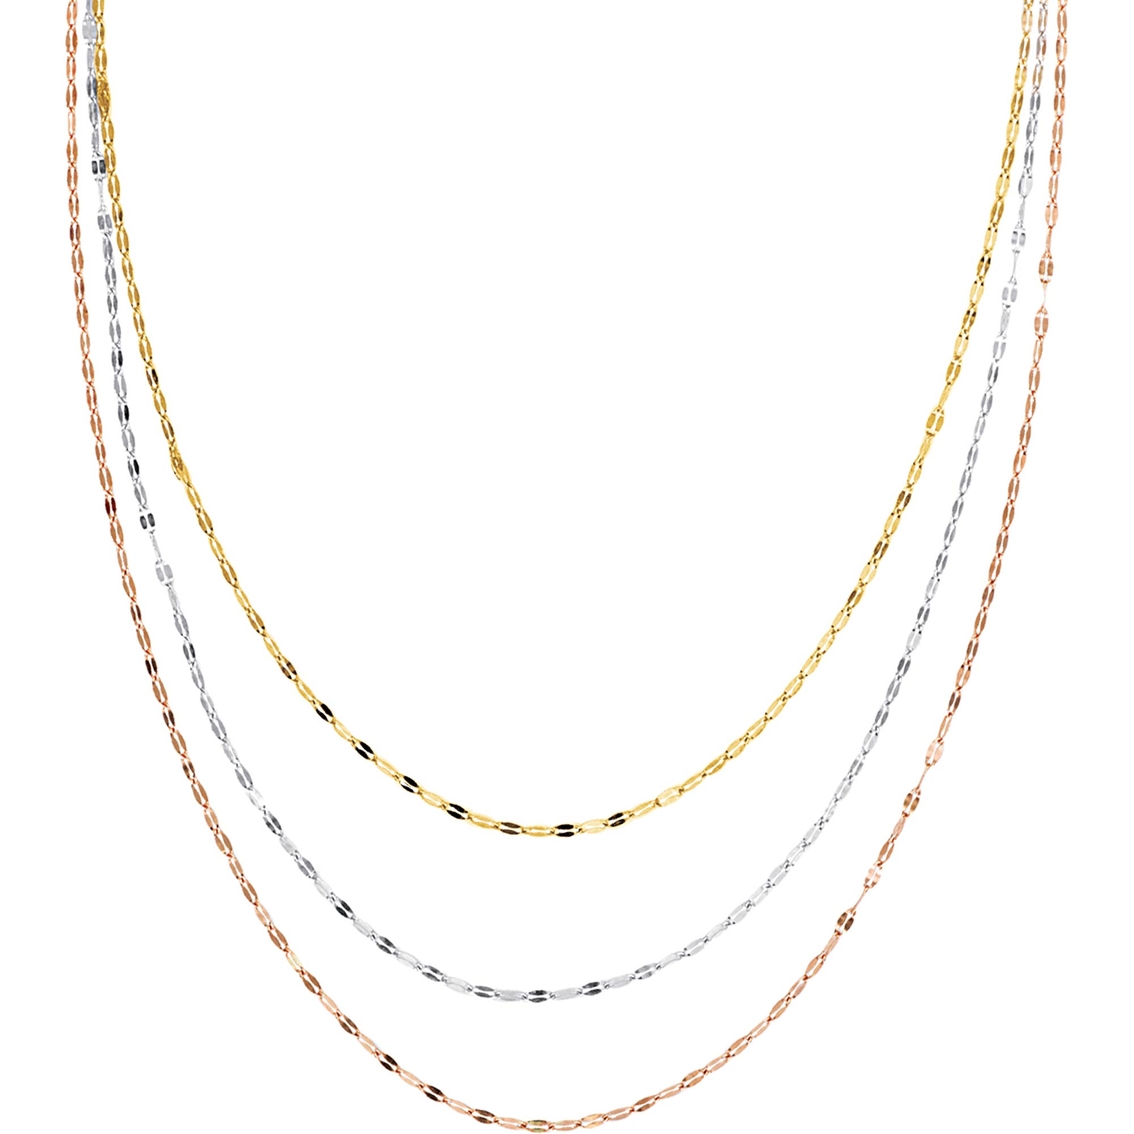 Art Class Gold 3 Piece Necklace NEW - beyond exchange